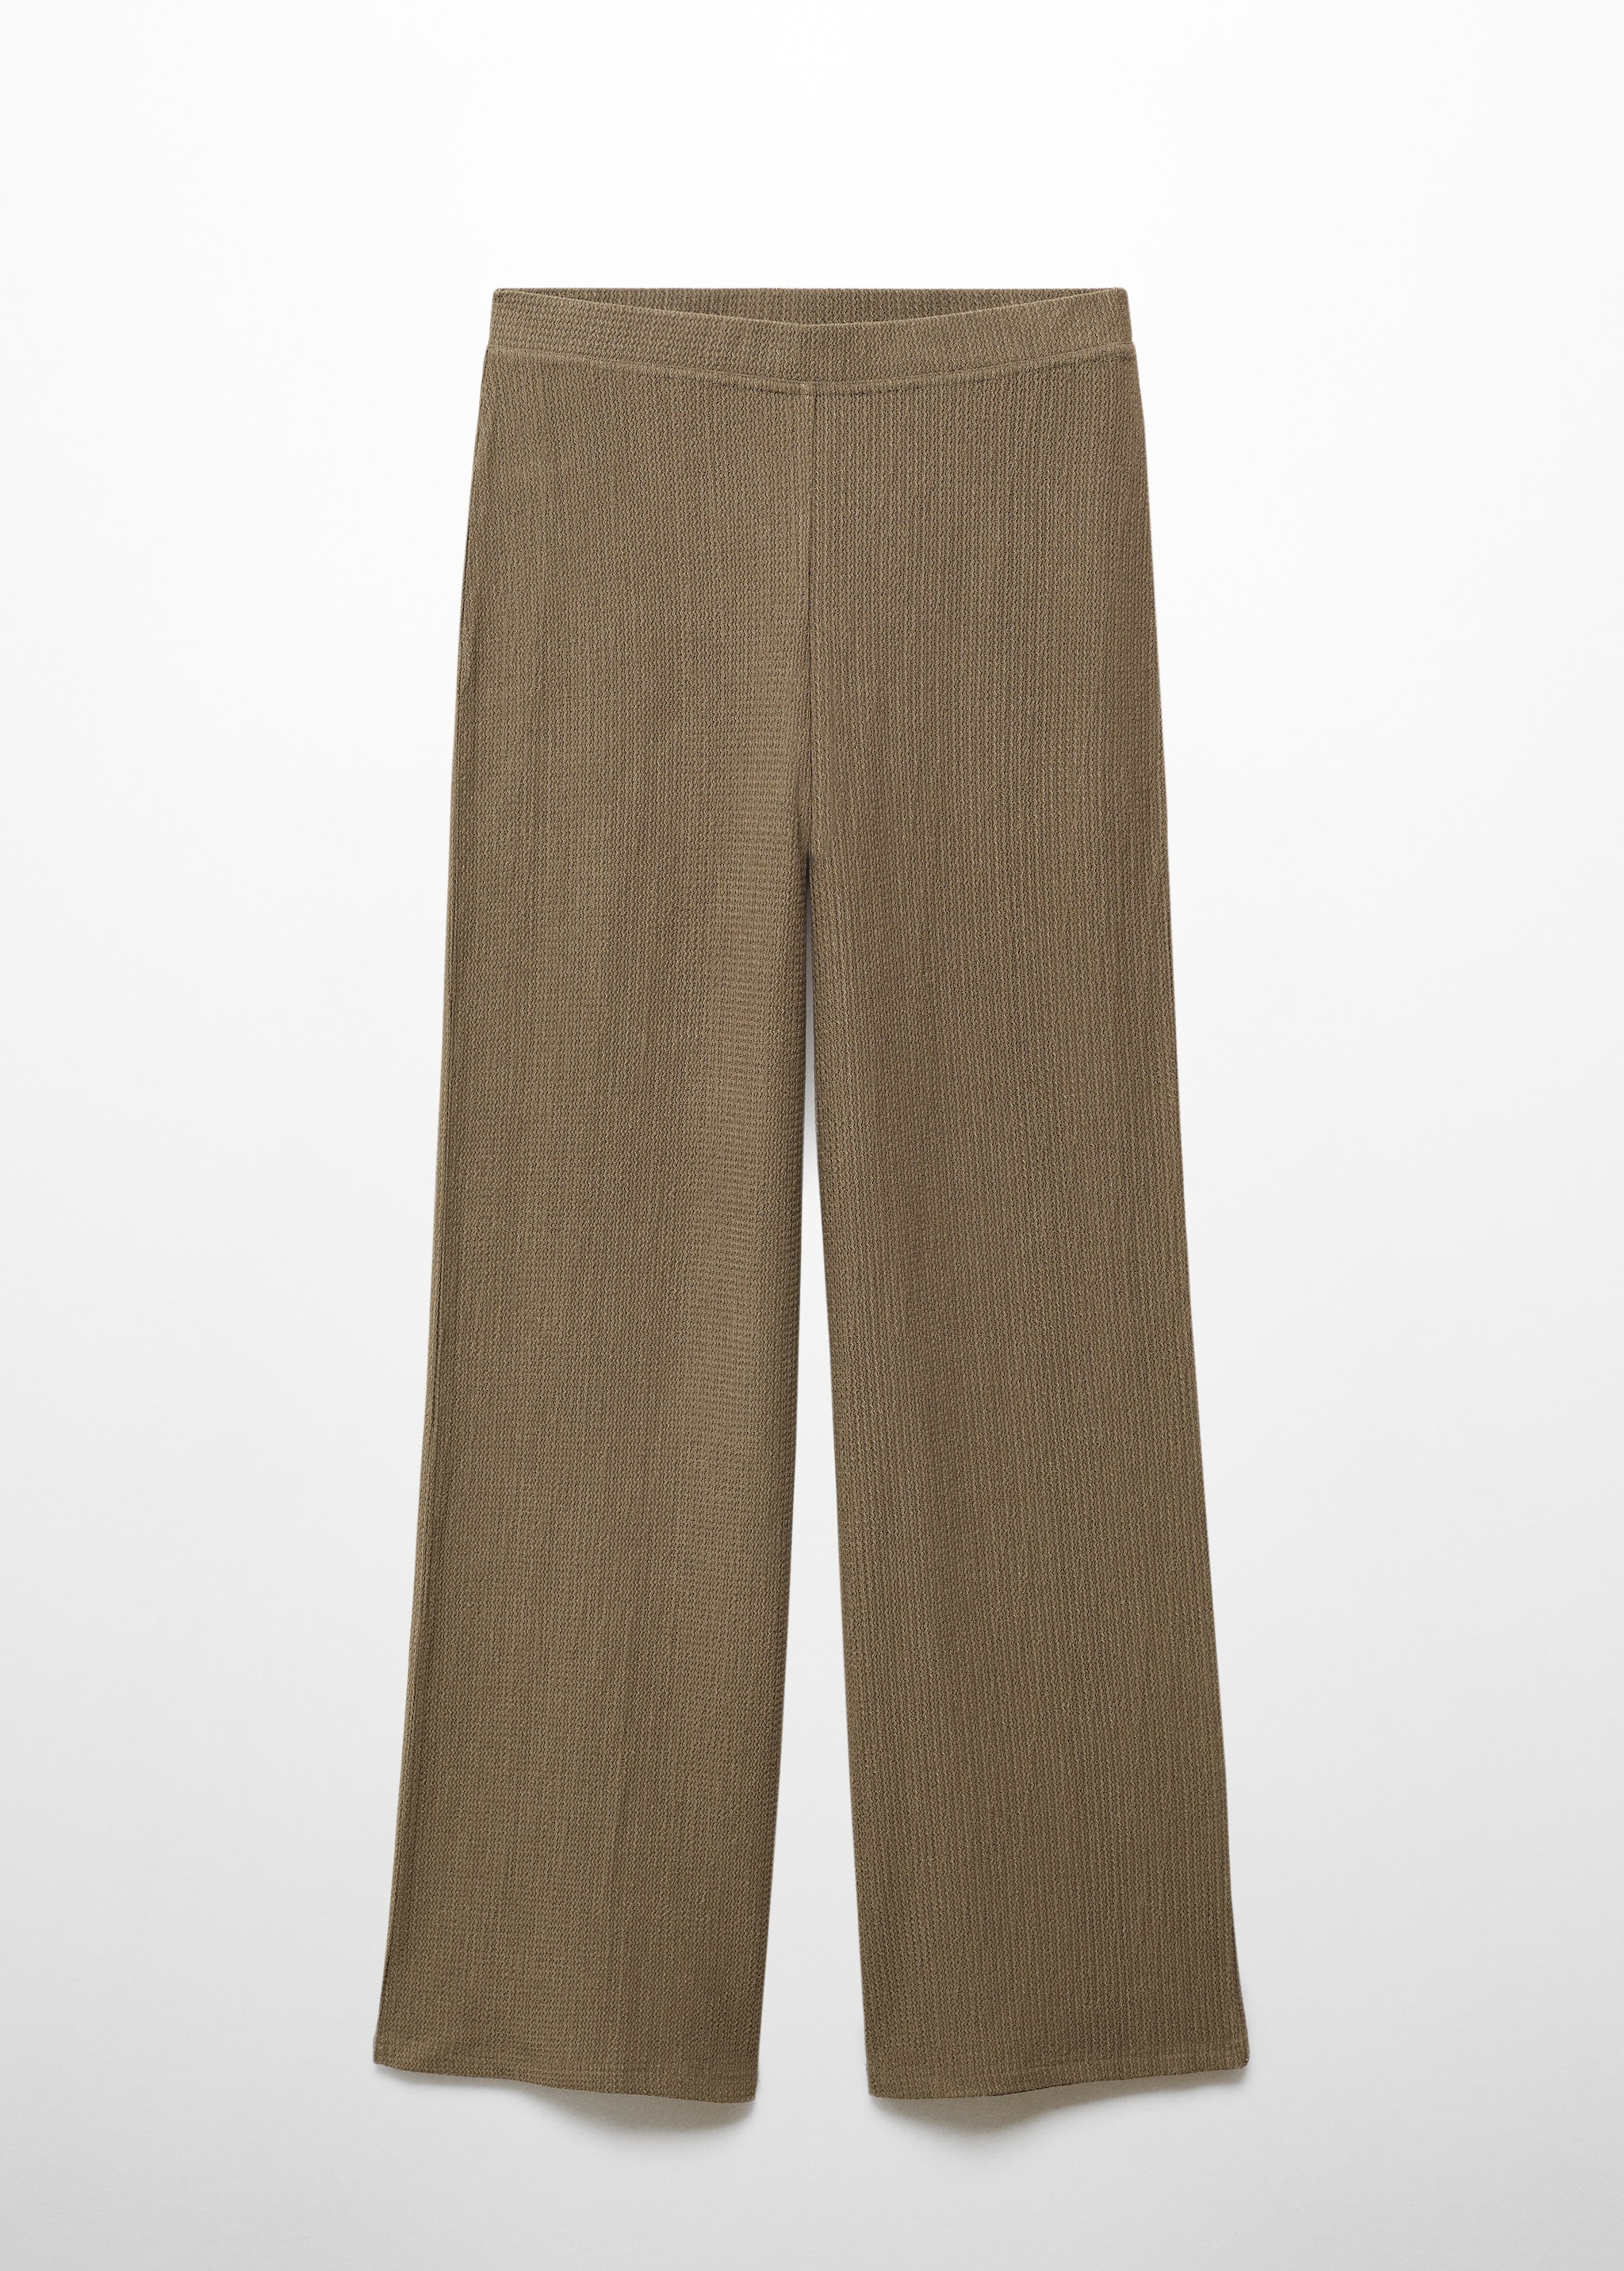 Textured wideleg trousers - Article without model